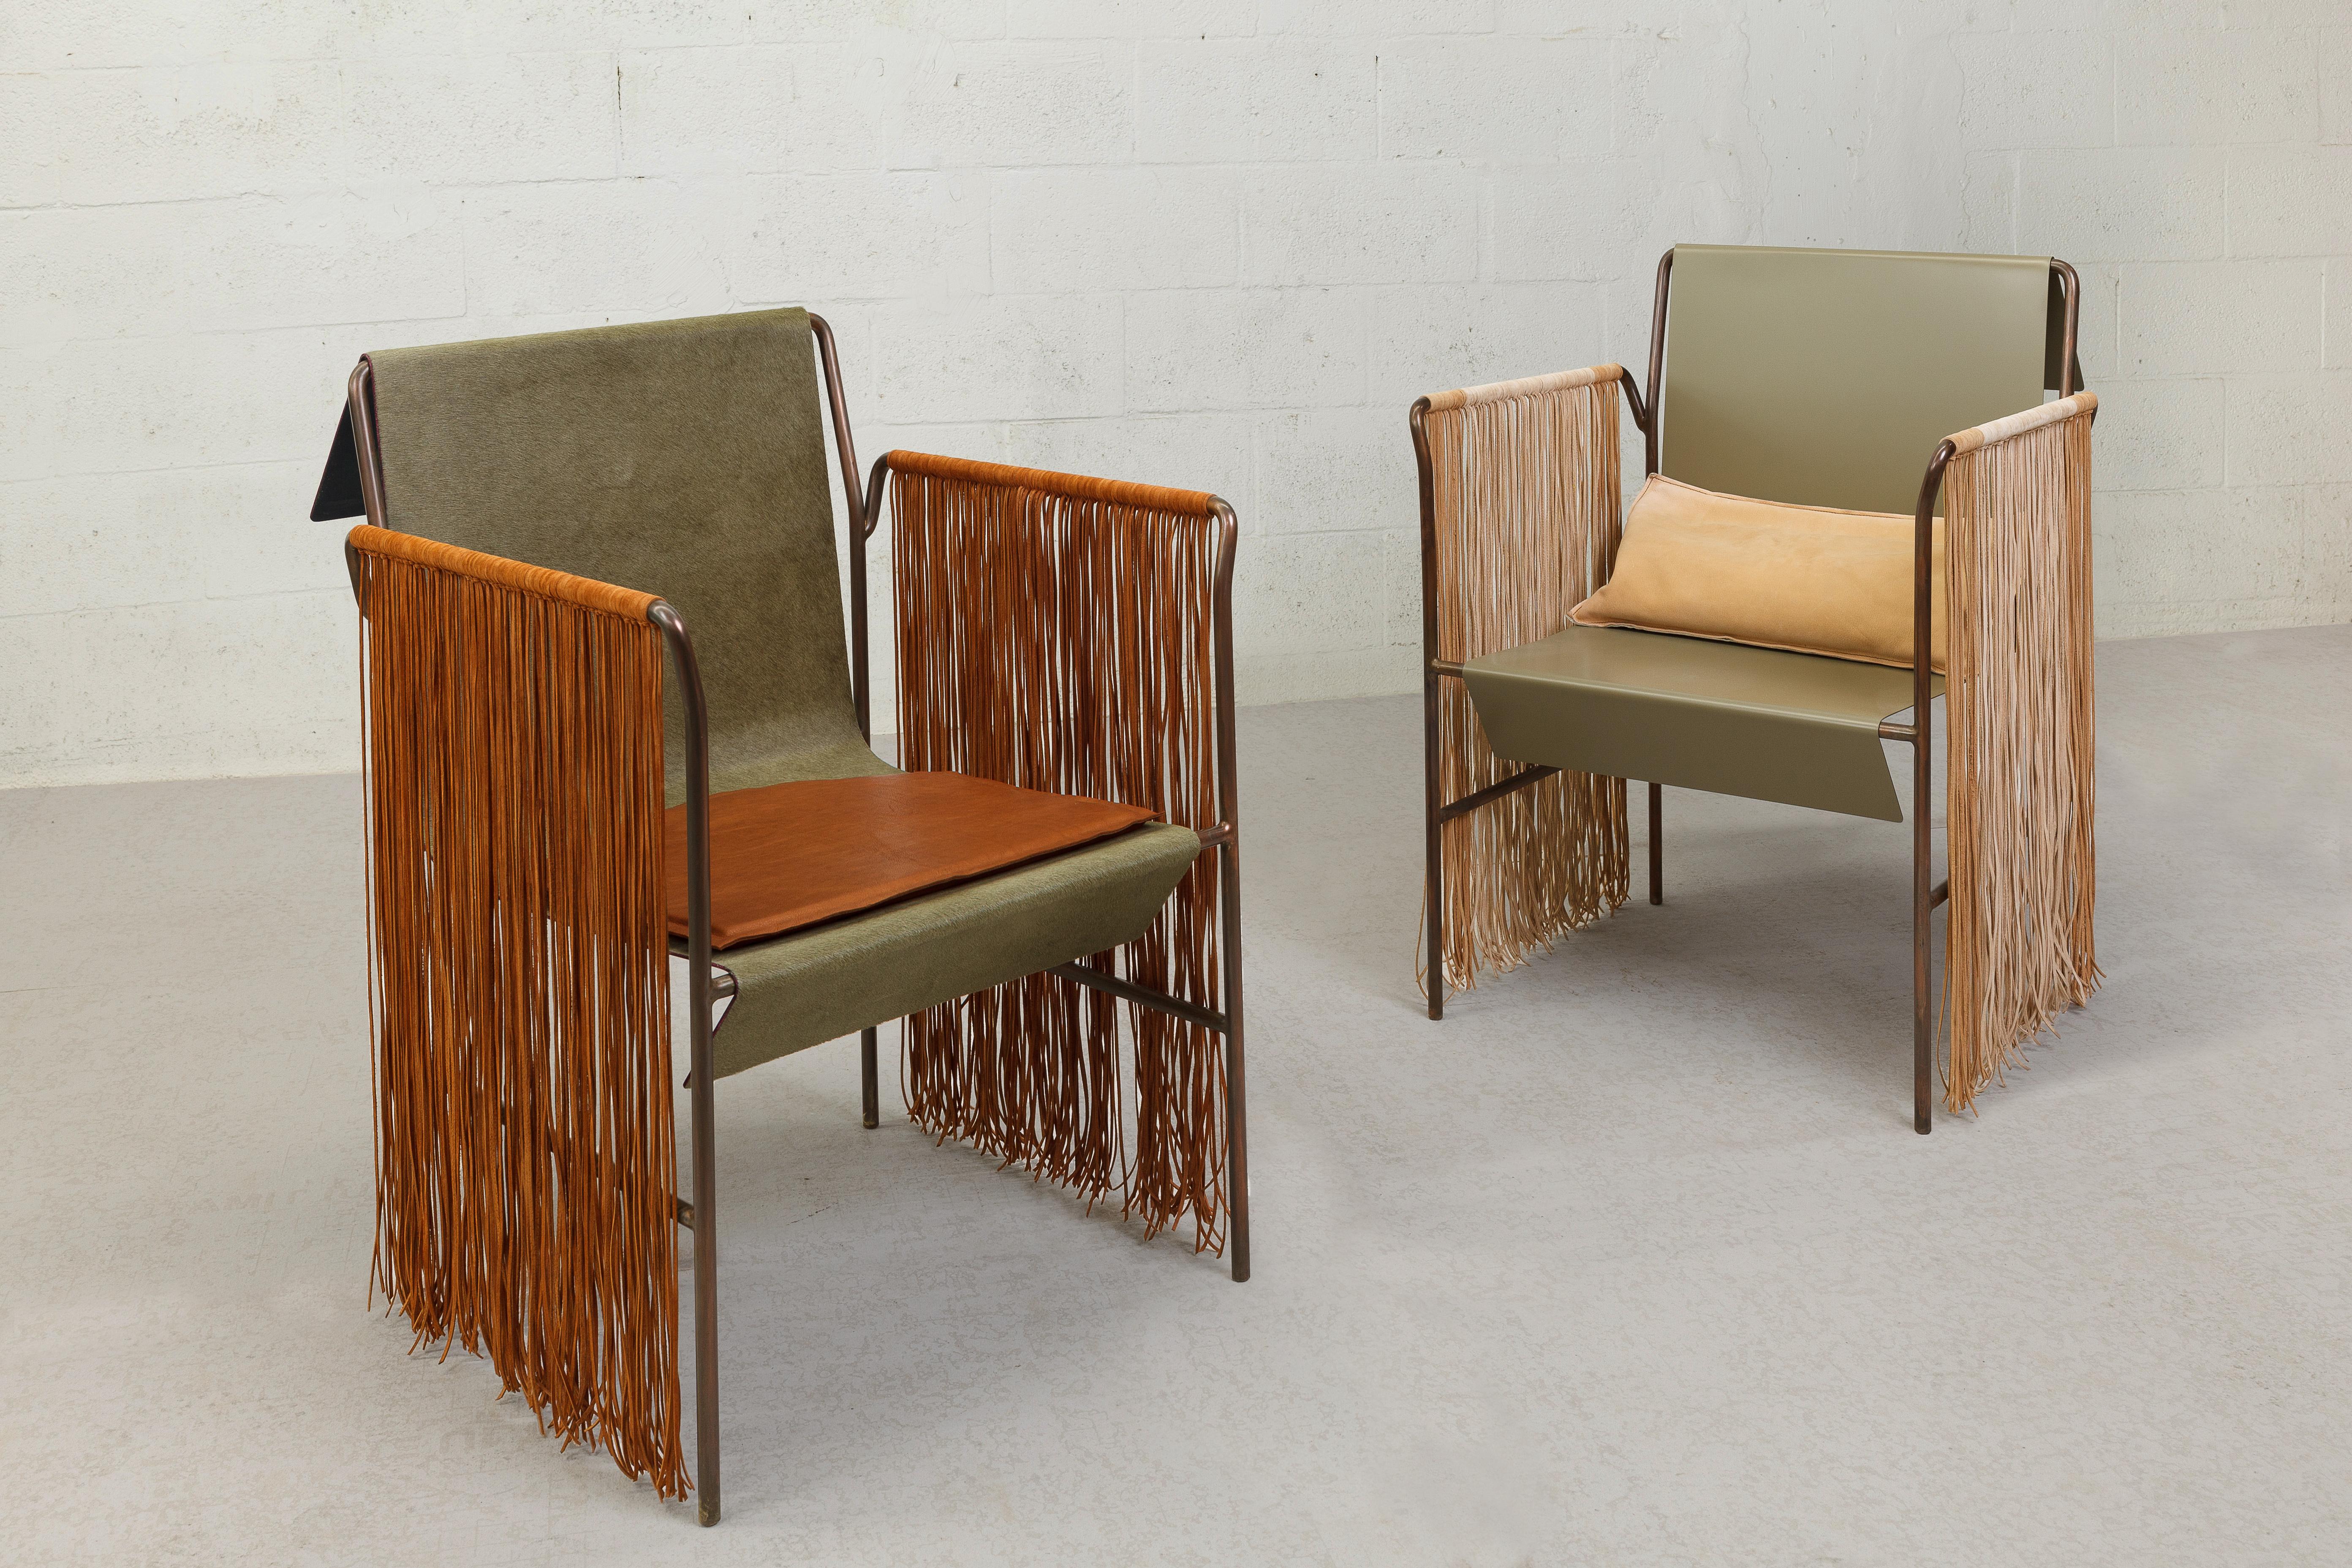 Contemporary Tribal Arm Chair in Patinated Steel and Leather by Vivian Carbonell For Sale 4